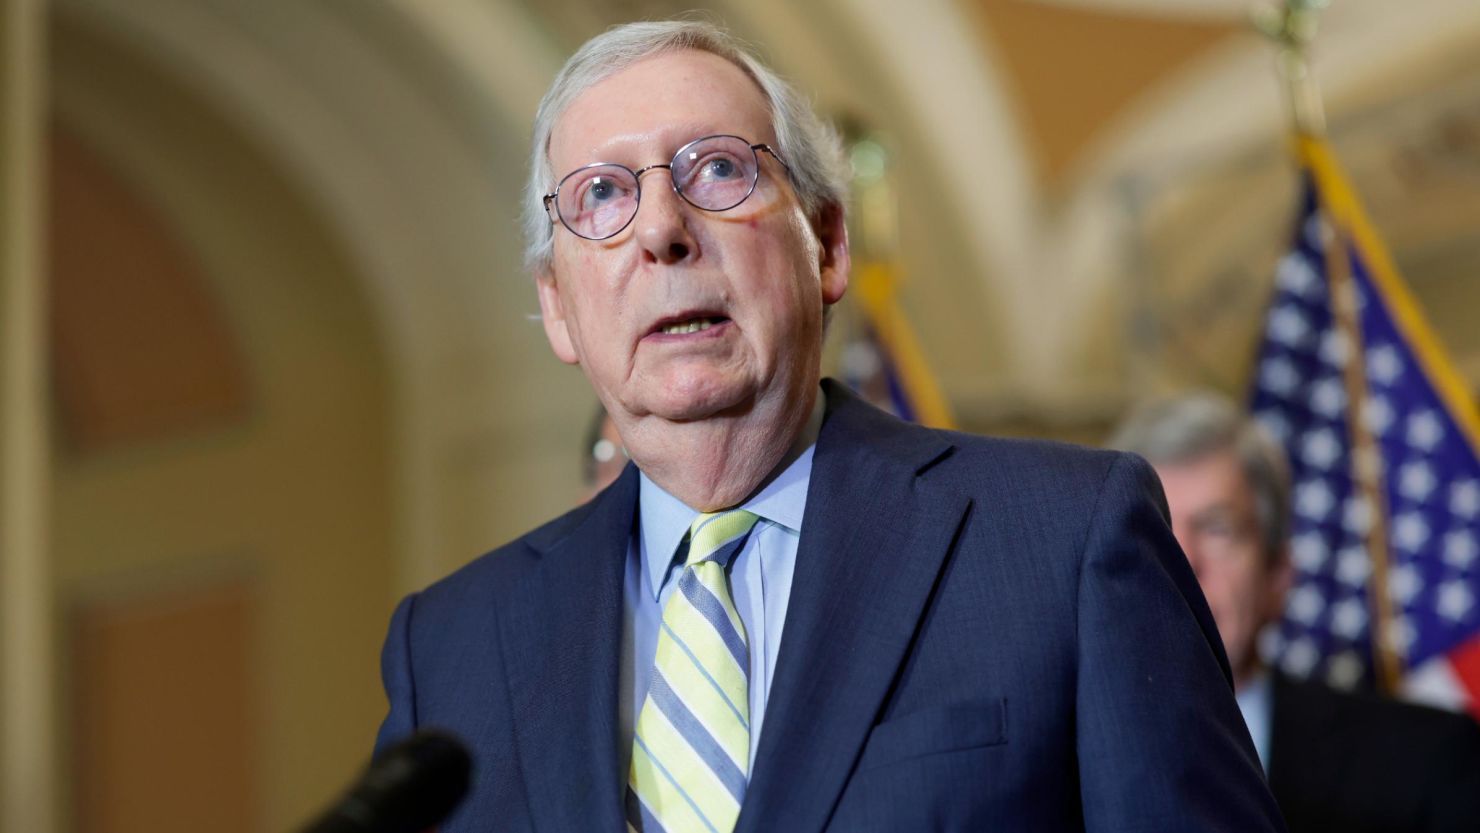 Senate Minority Leader Mitch McConnell speaks to reporters following the weekly Republican policy luncheons on May 3, 2022 in Washington.